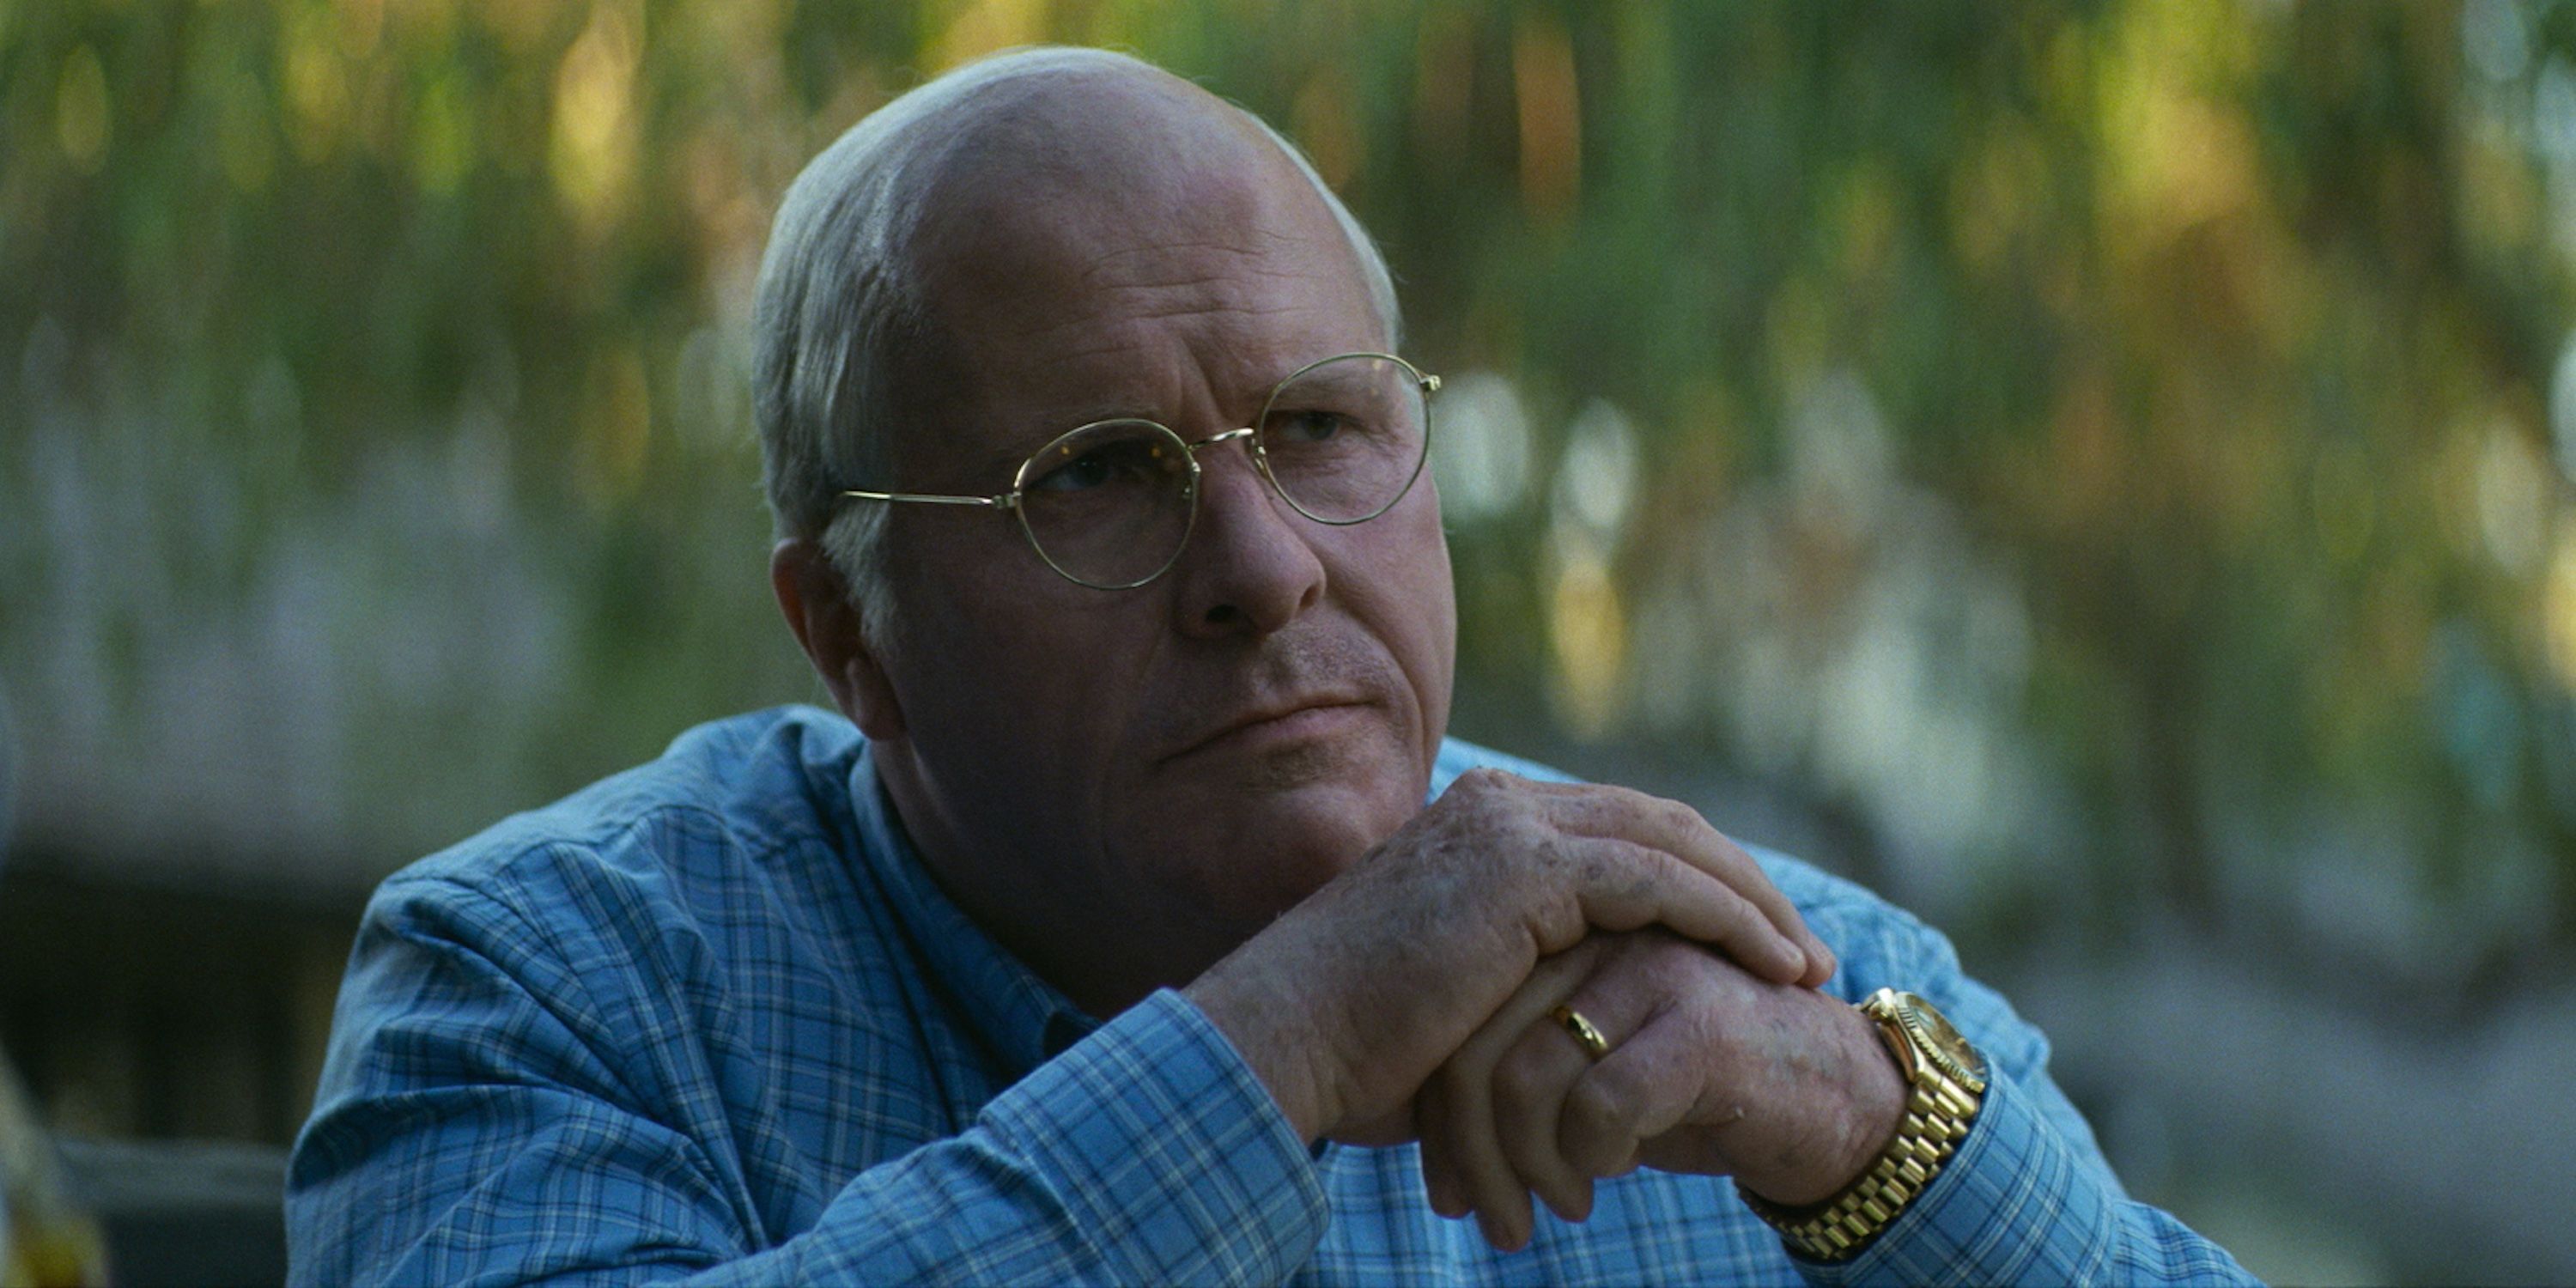 Christian Bale in Vice as Dick Cheney speaking with George W. Bush